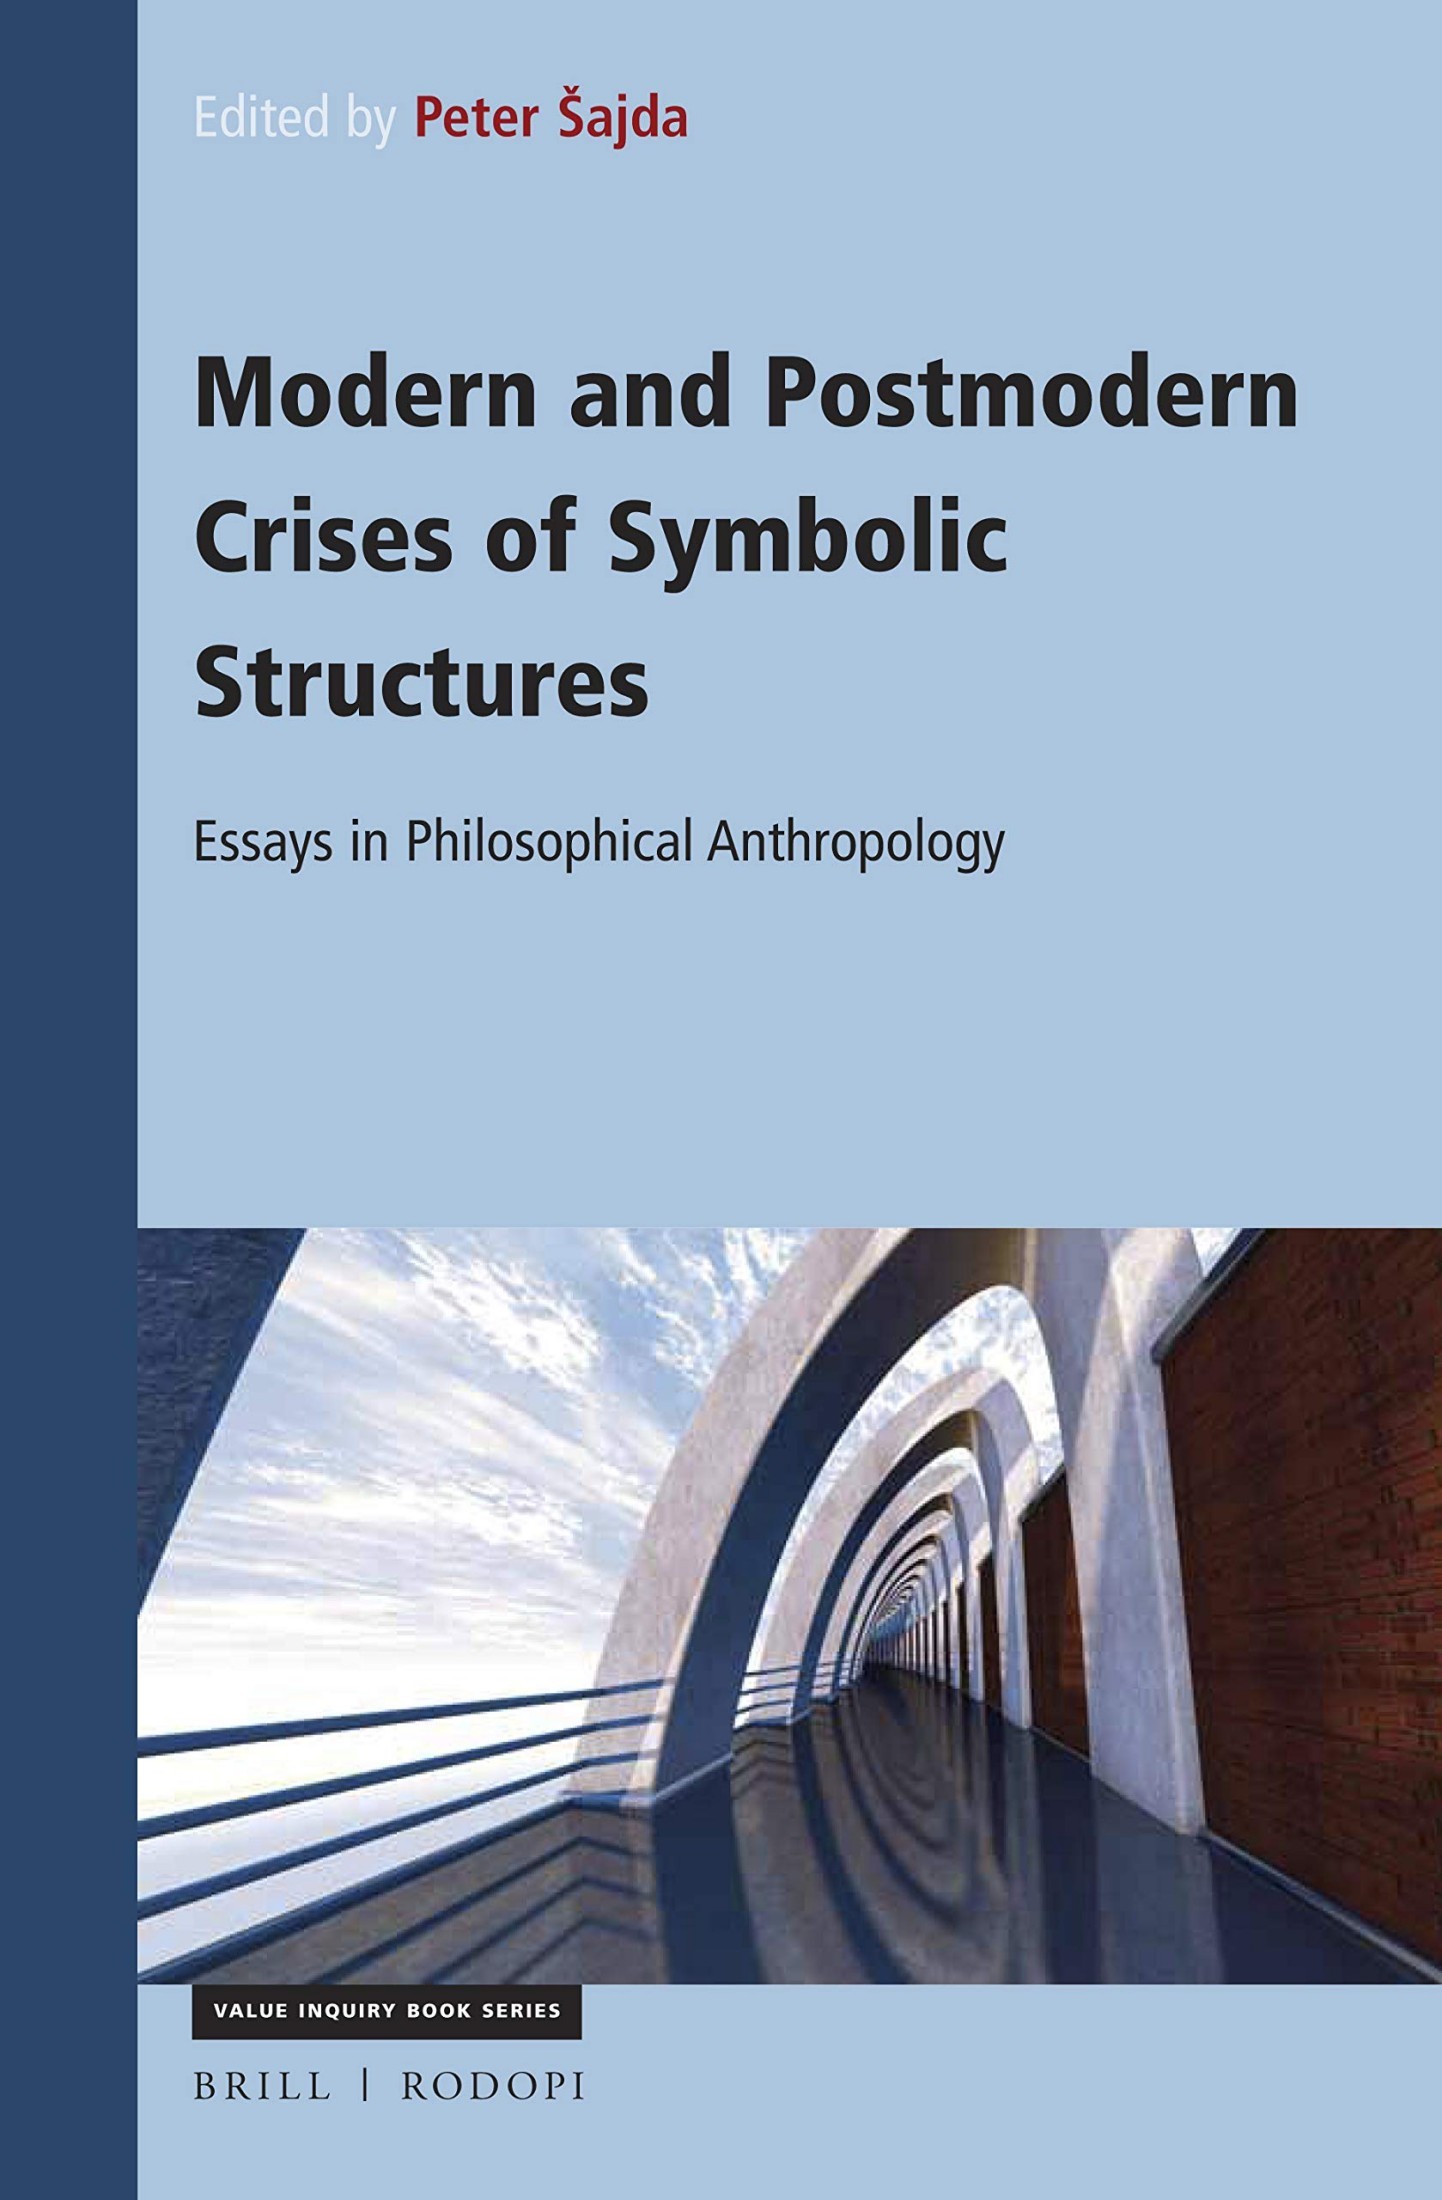 Modern and Postmodern Crises of Symbolic Structures: Essays in Philosophical Anthropology